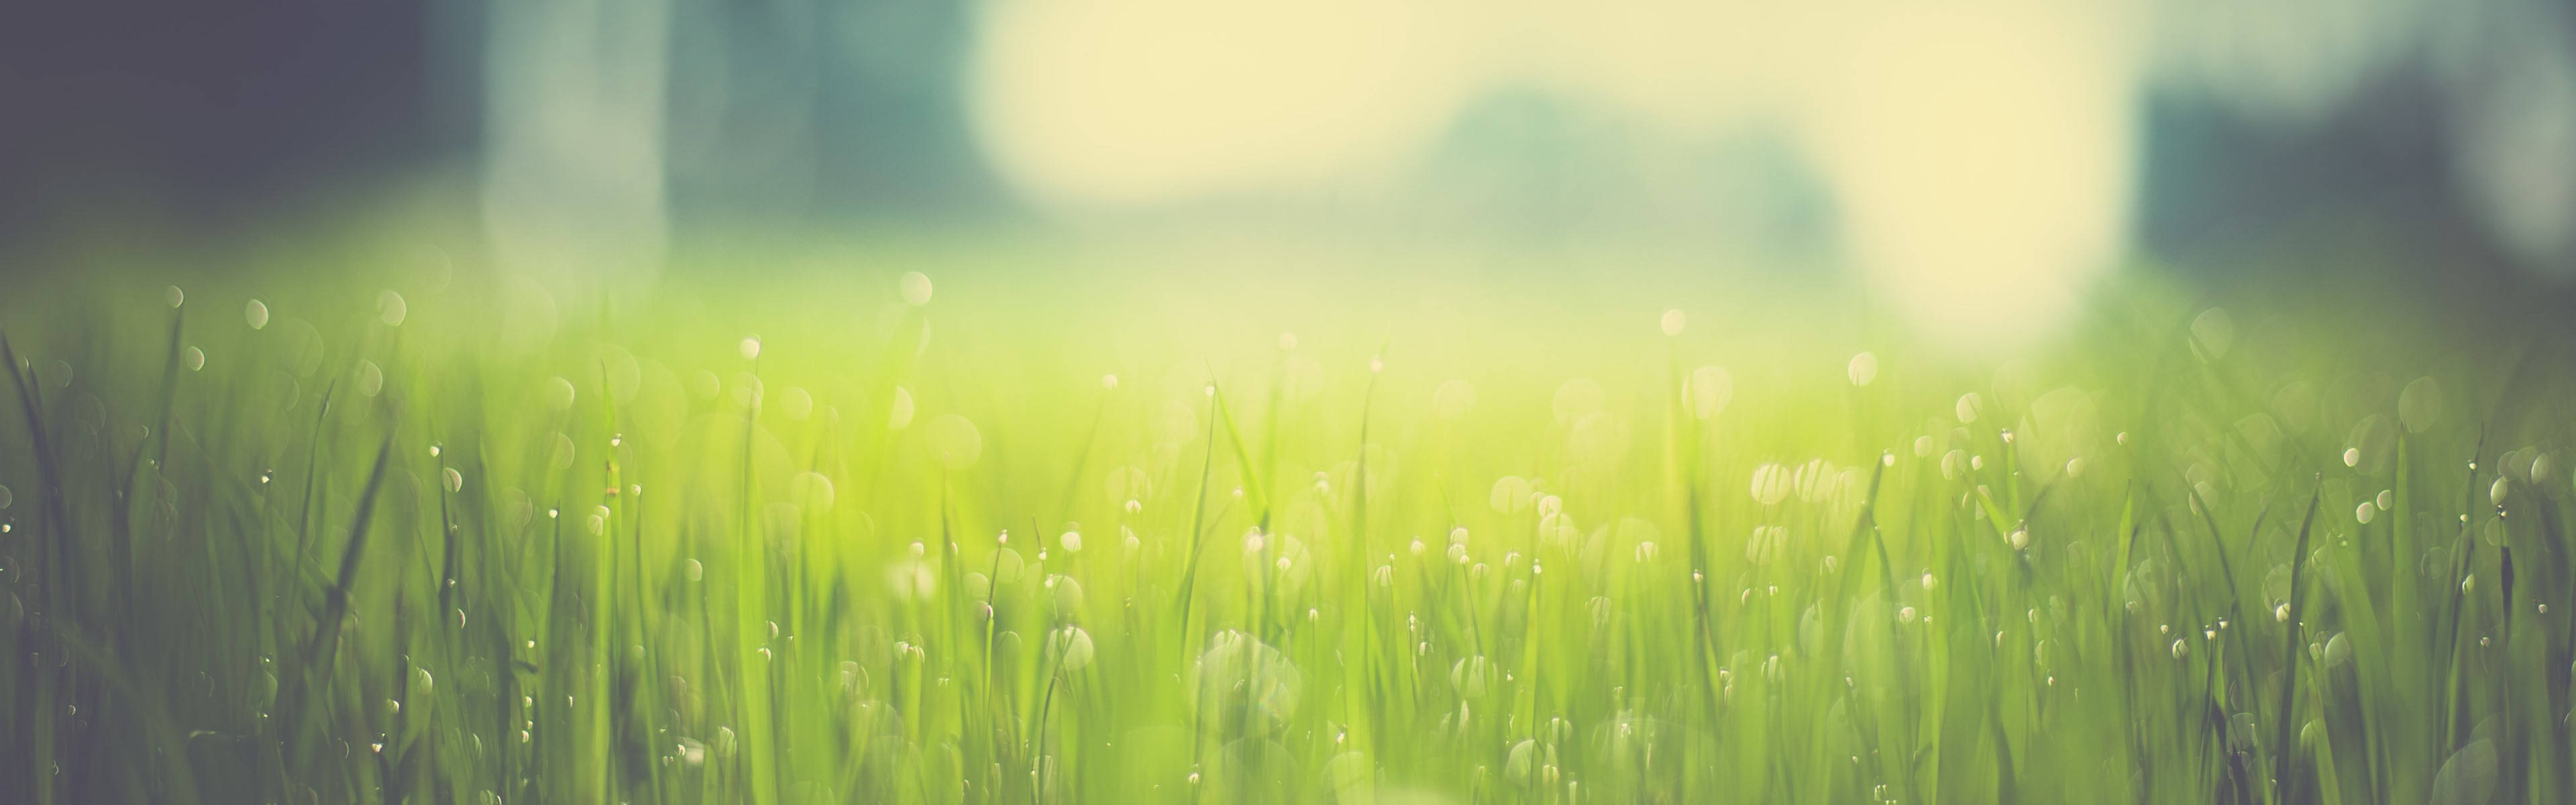 4k Dual Monitor Grass With Dew Drops Background